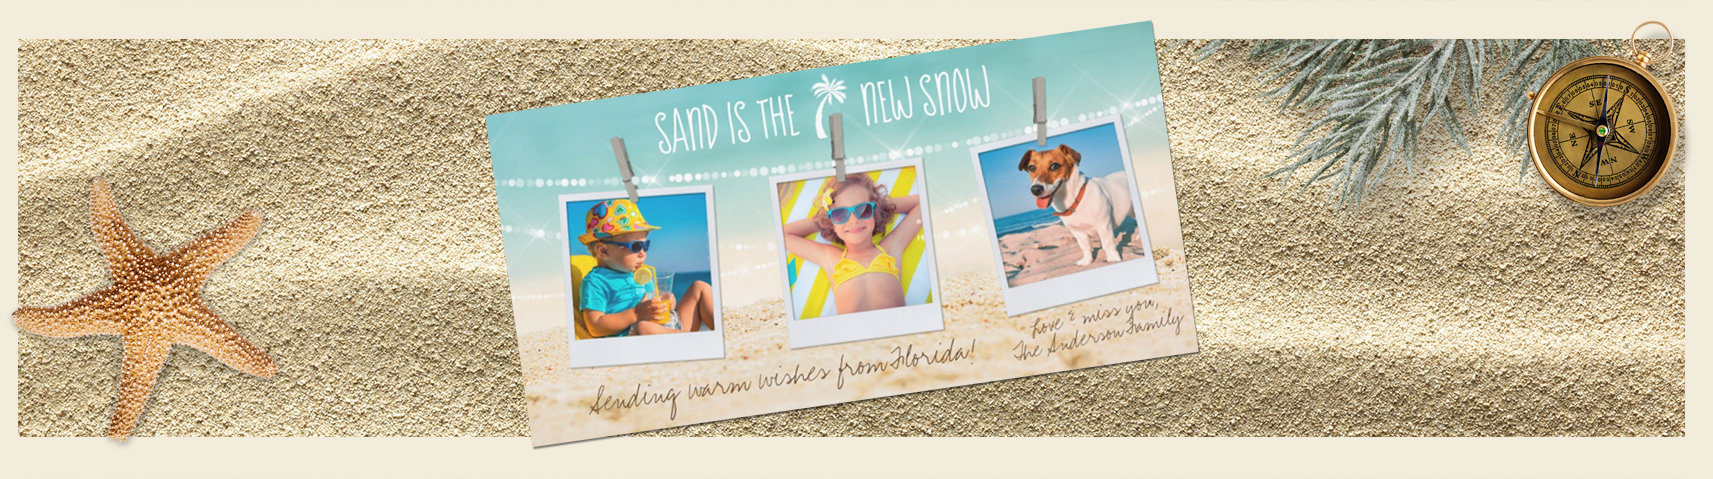 Aqua Ocean and Sandy Beach Sand is the New Snow Holiday Card | www.NauticalBoutique.Co